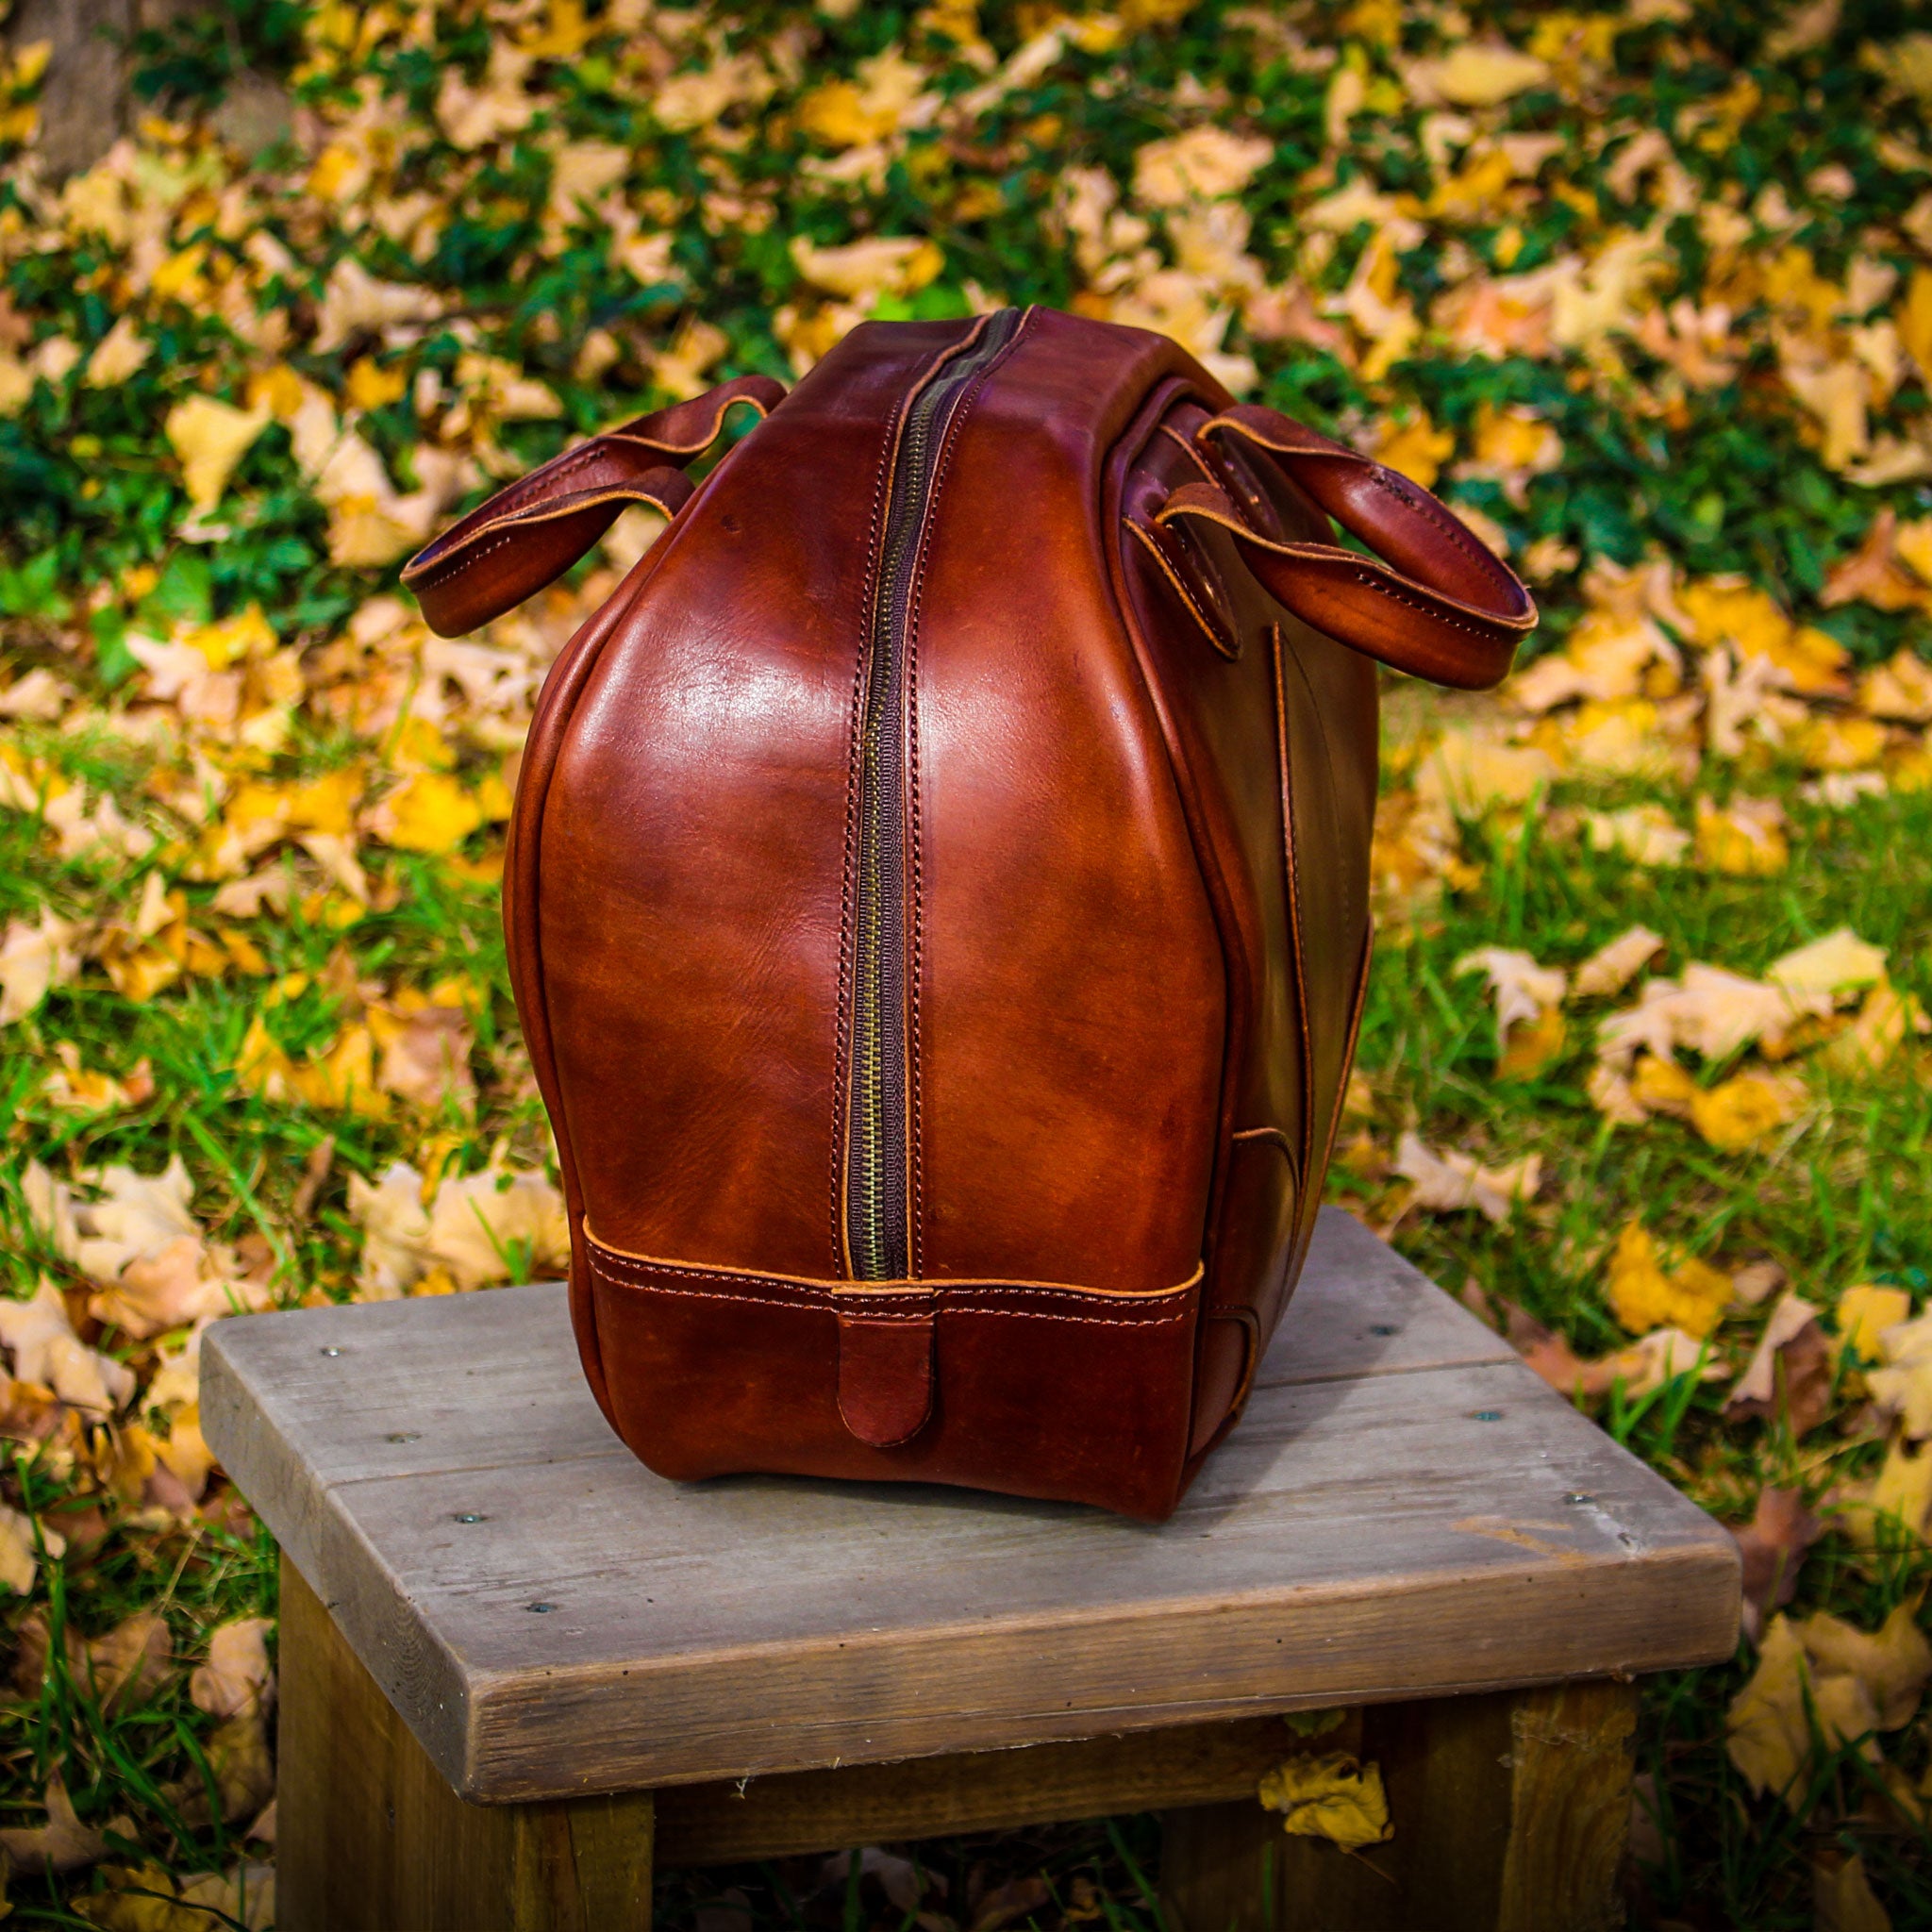 Vintage 1960's Brunswick Leather Bowling Ball Bag for Sale in